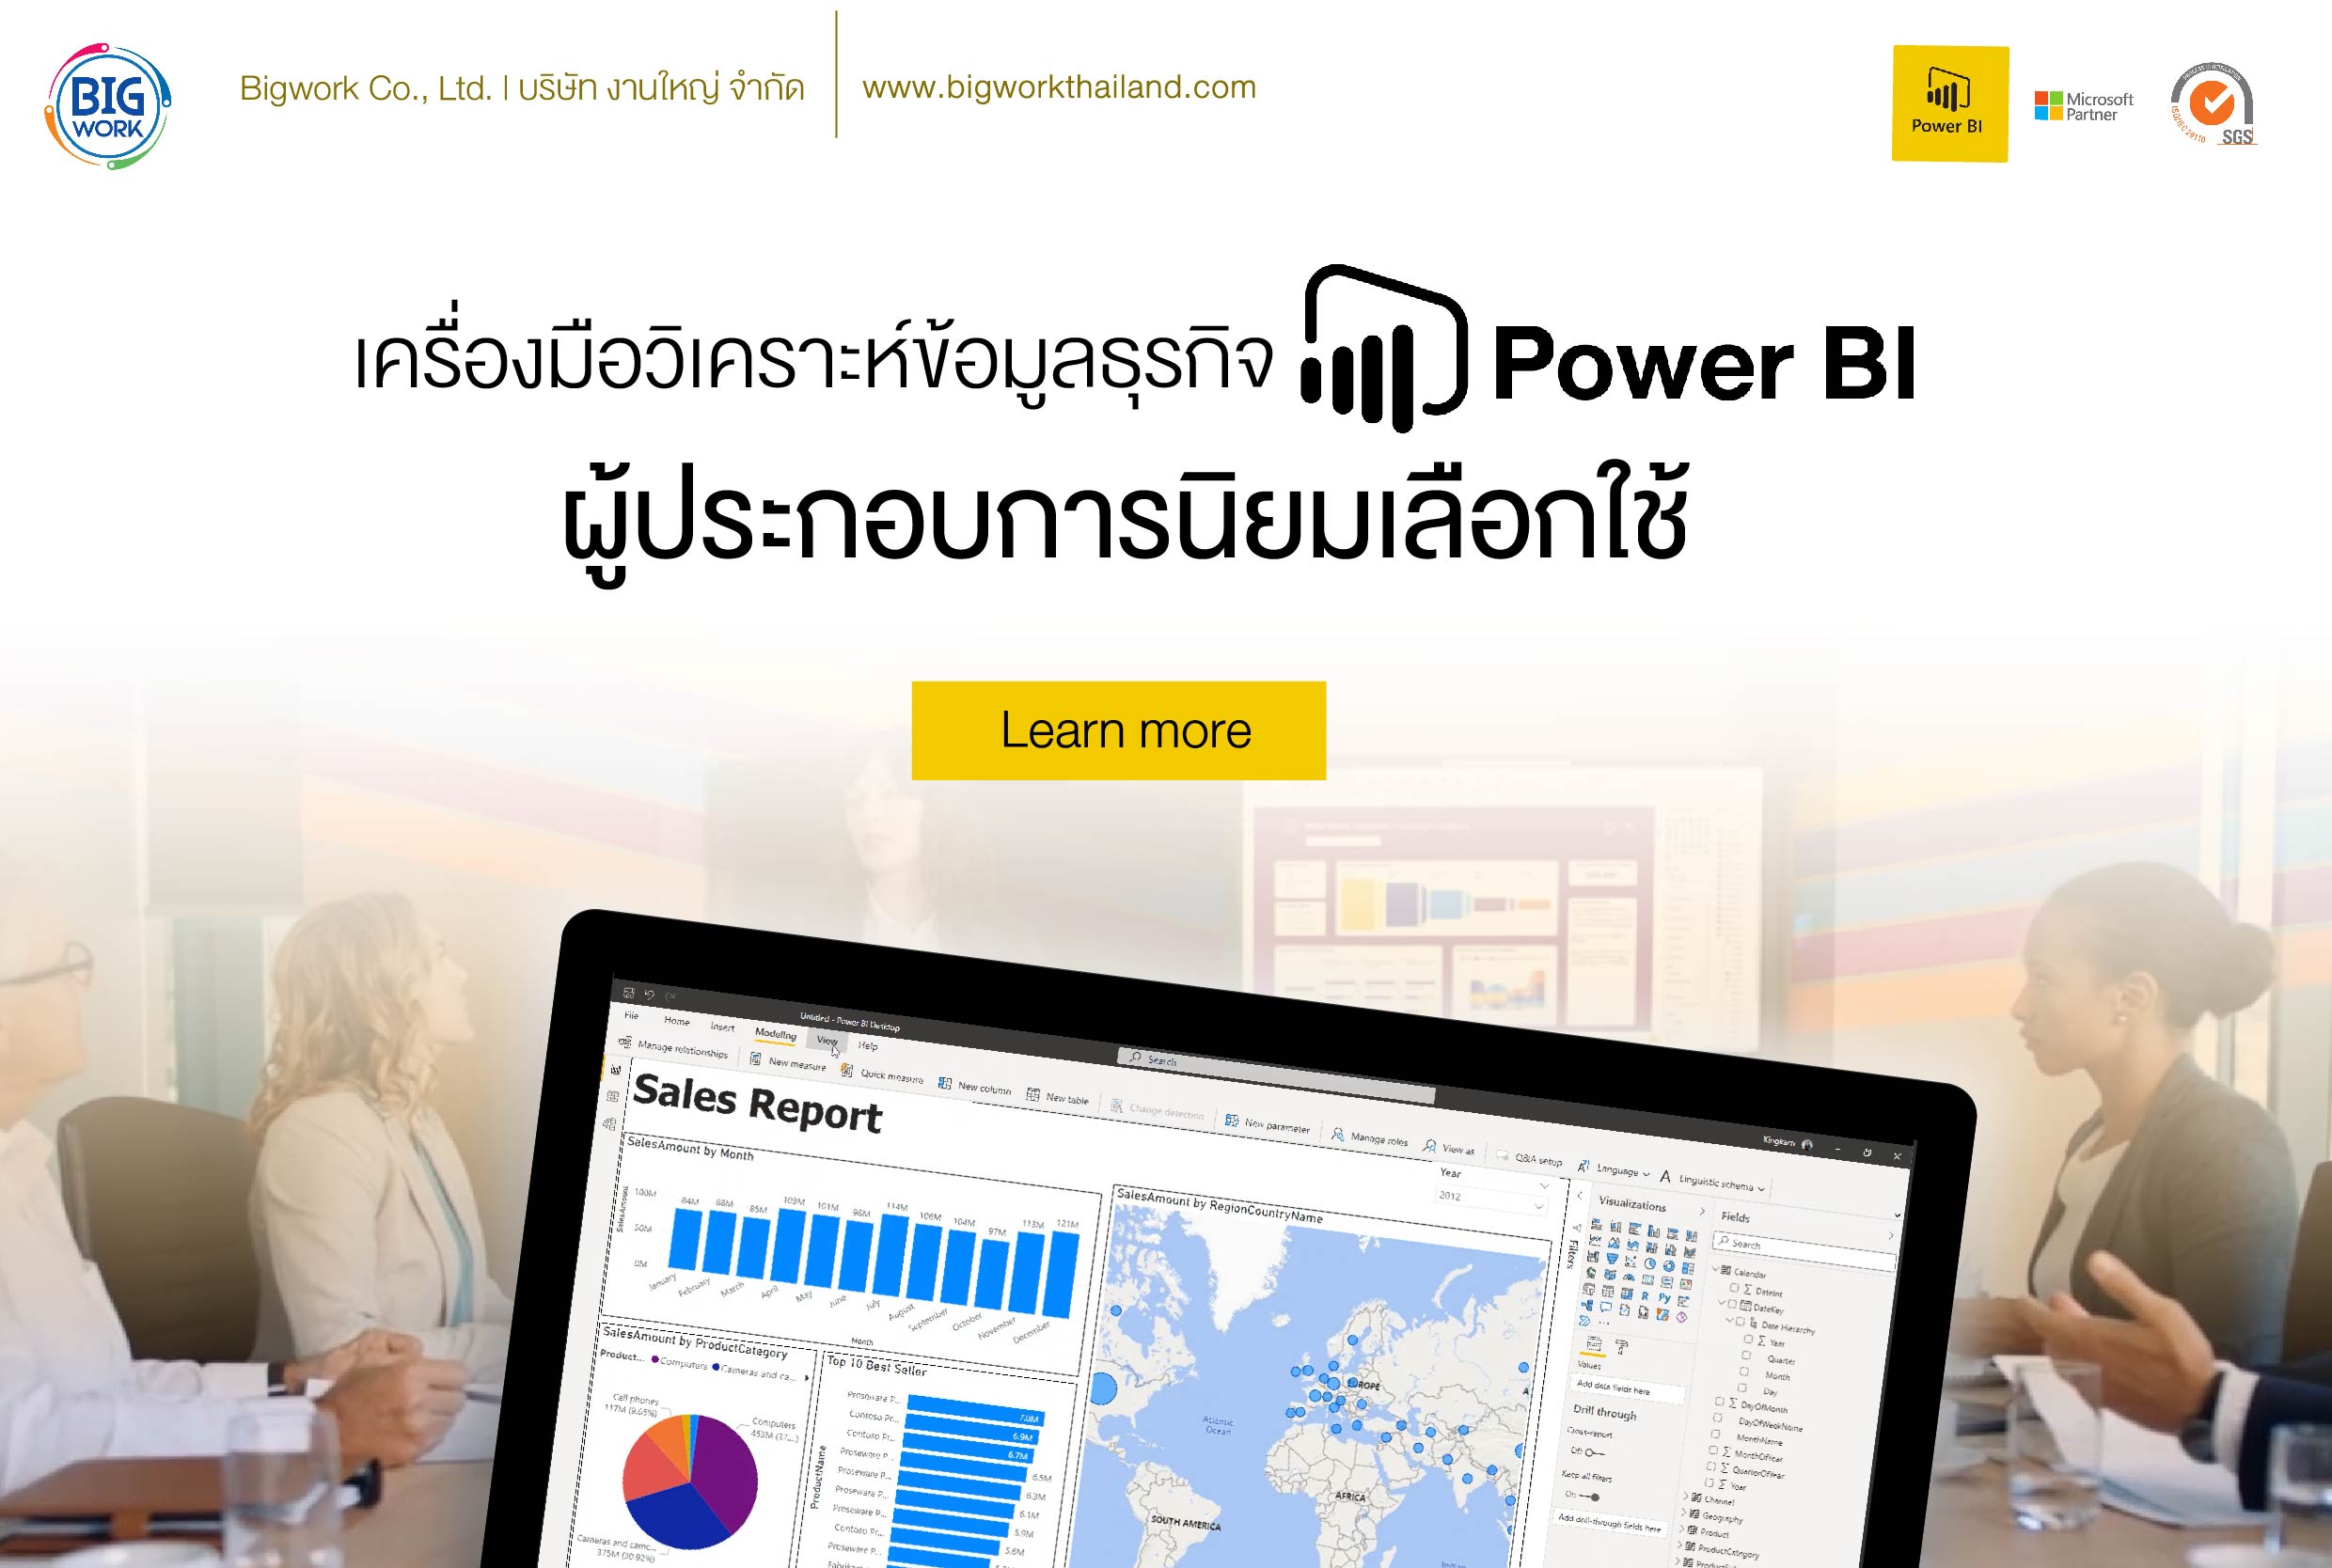 Power BI Business Analytics Tool that business people use